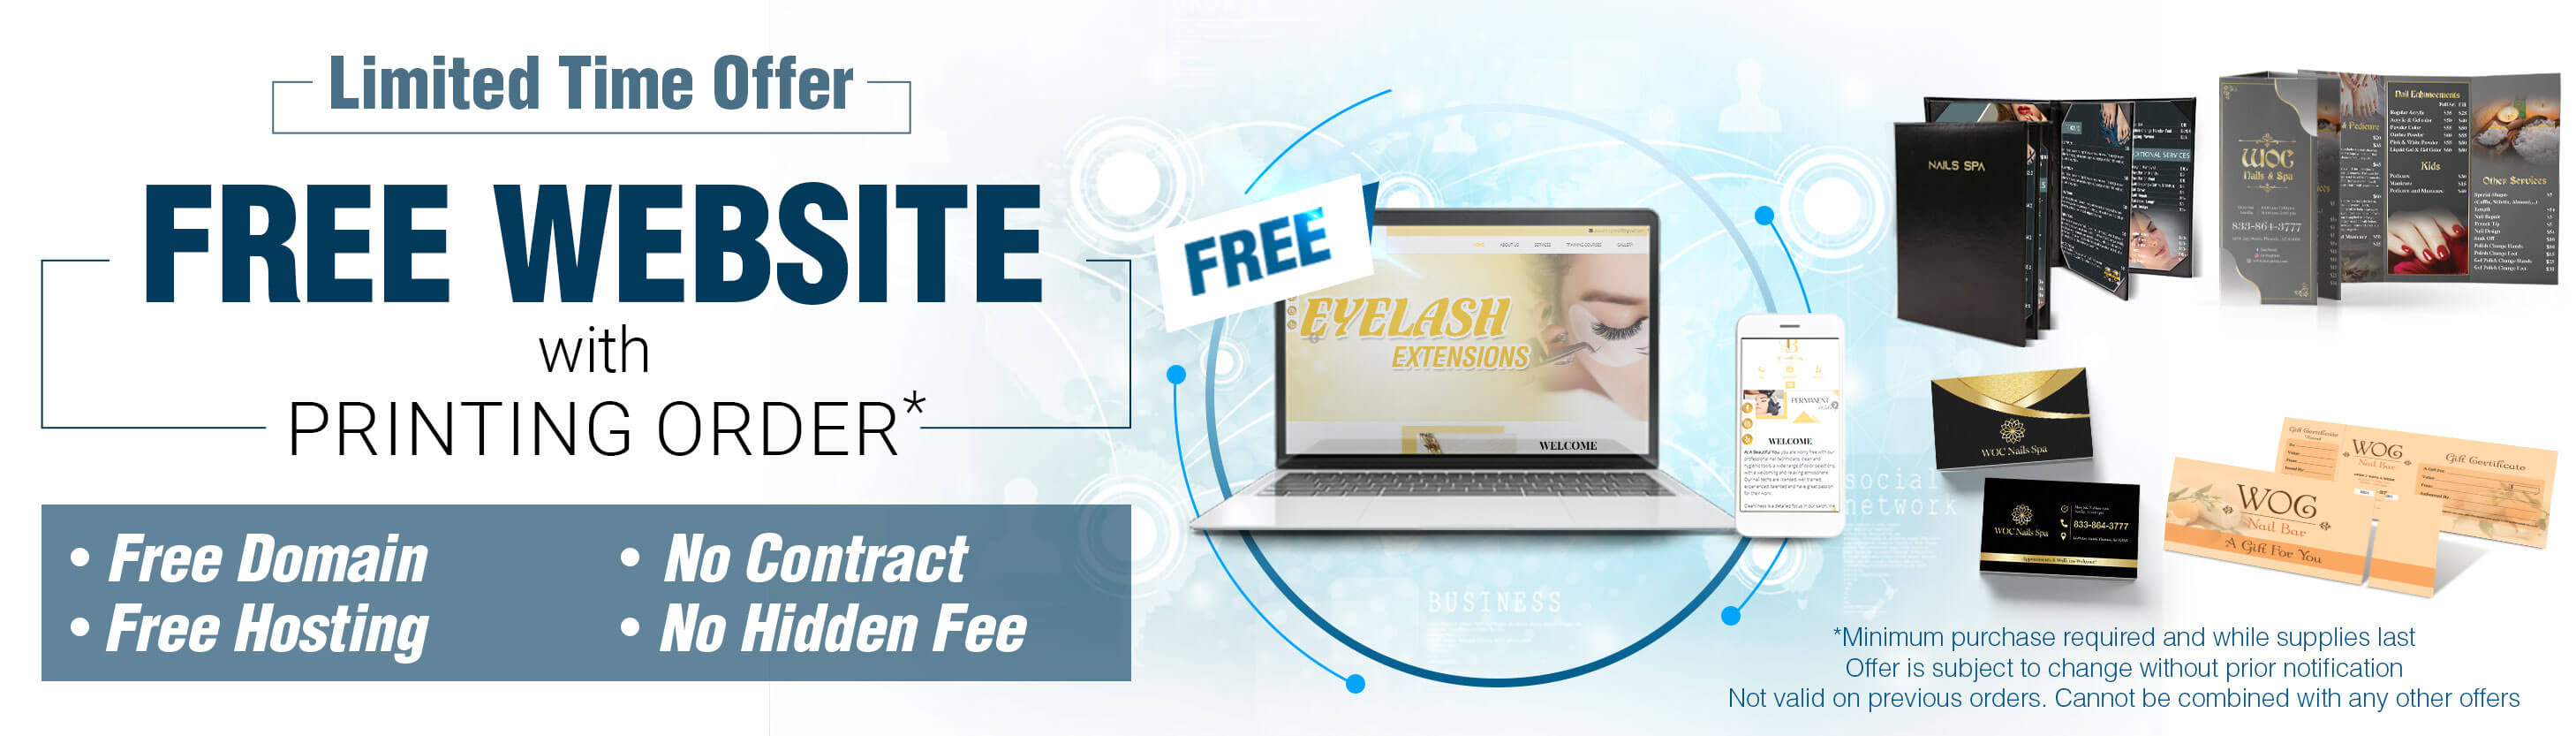 Limited time offer-FREE WEBSITE with Printing order